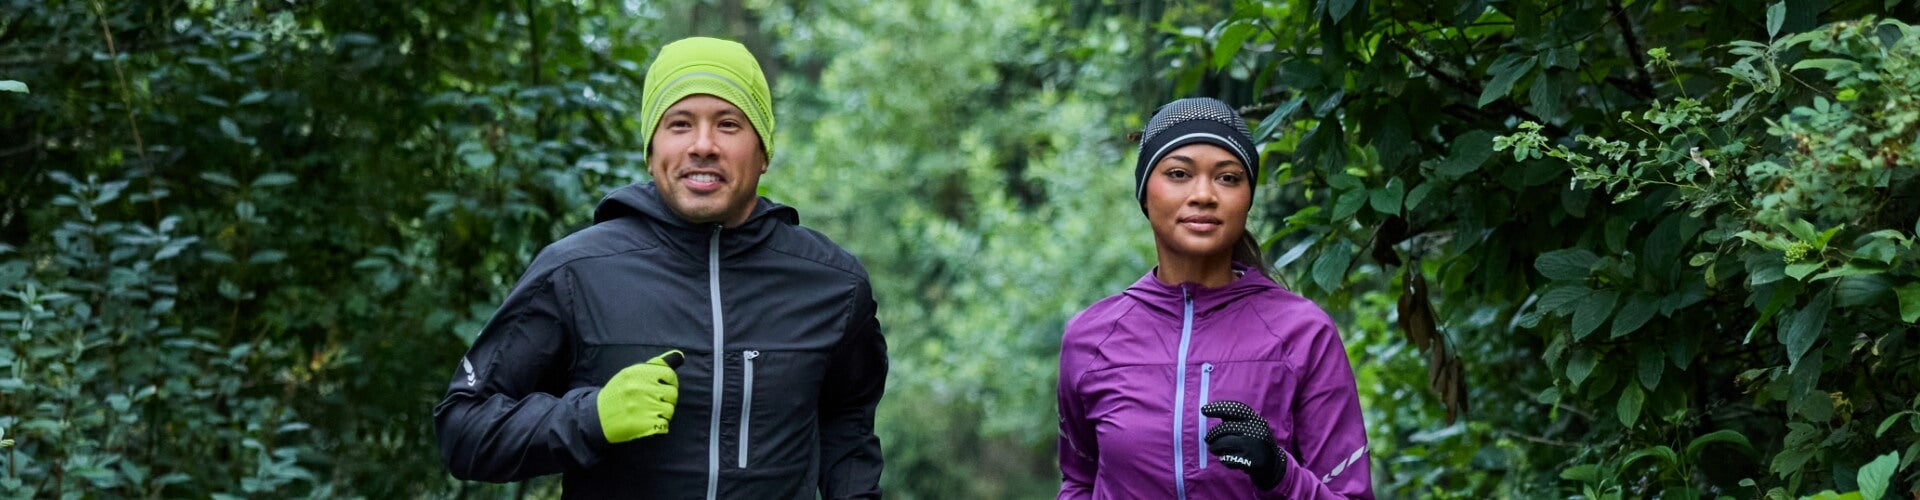 2 Runners Wearing Hats As They Jog Through the Forest